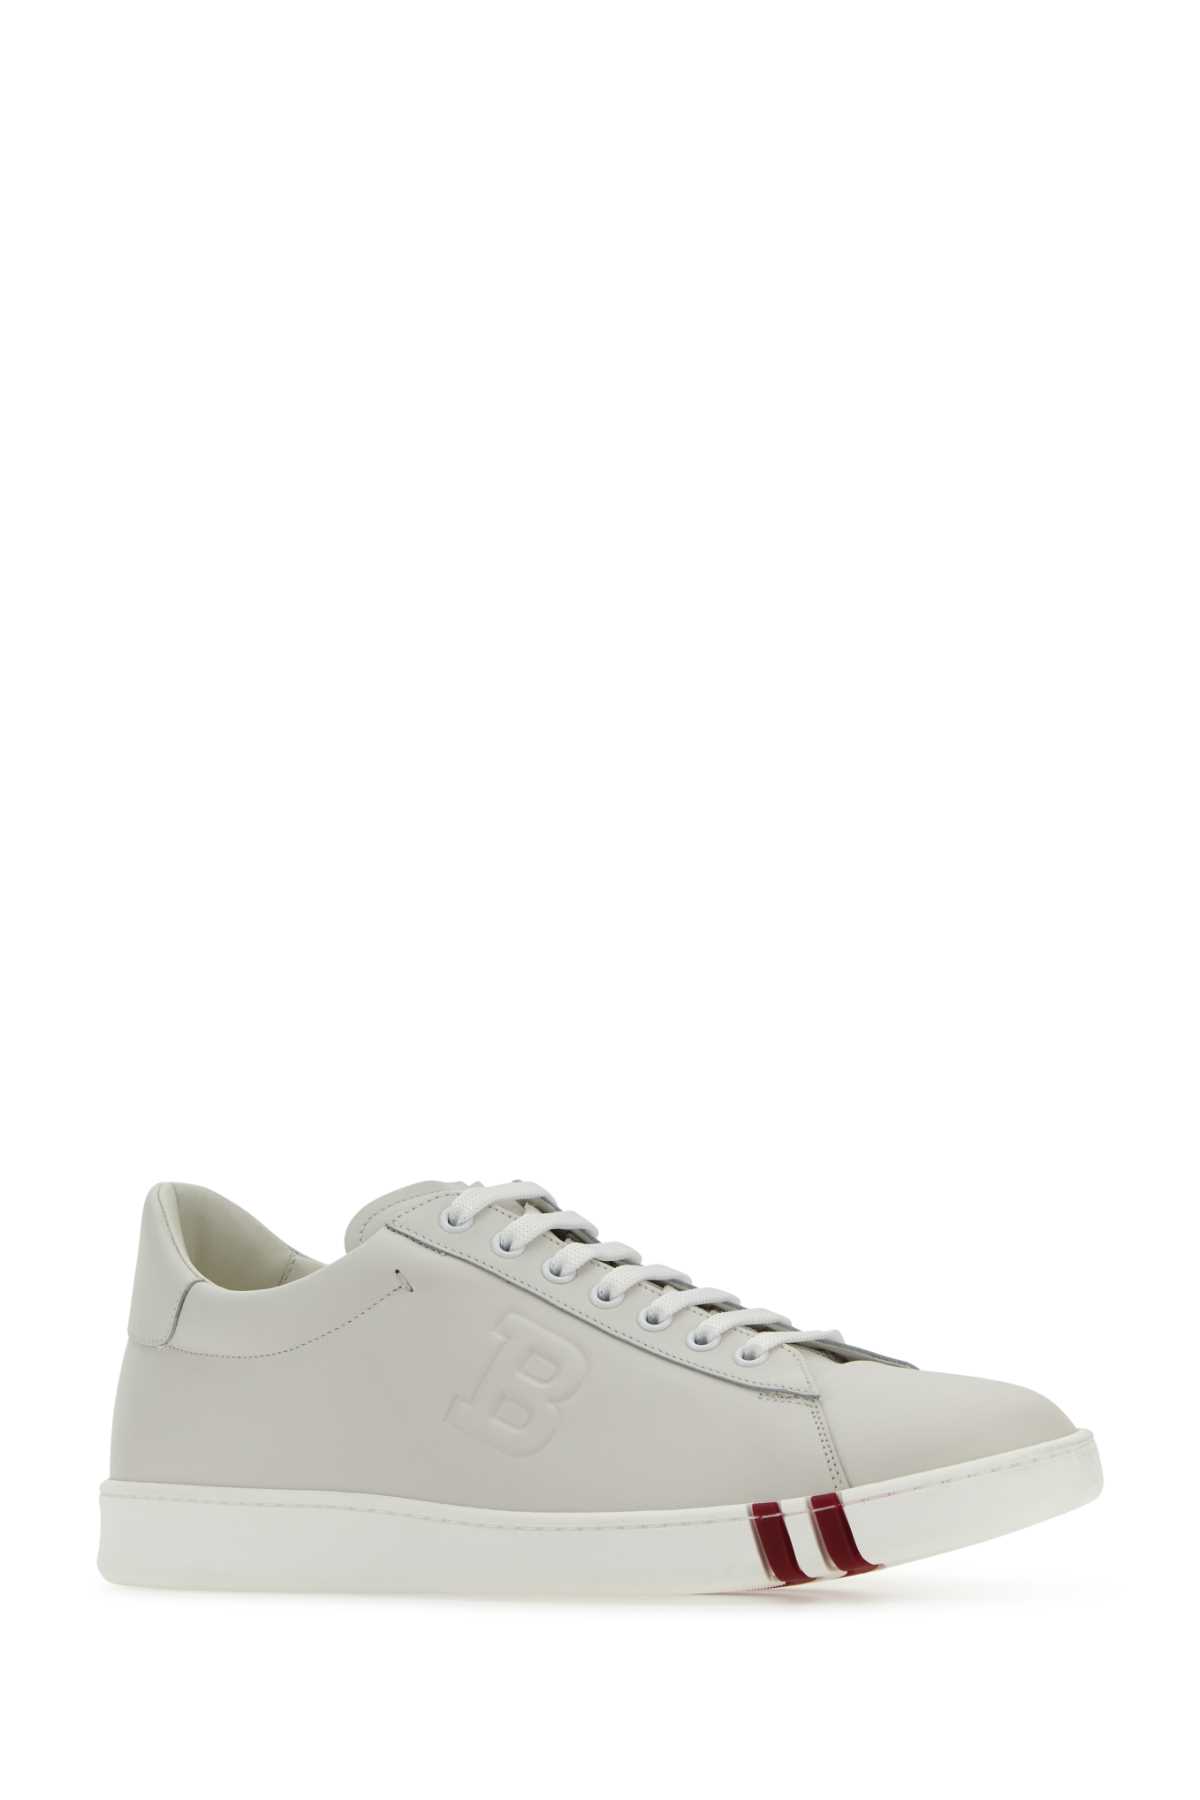 Shop Bally Chalk Leather Asher Sneakers In F607